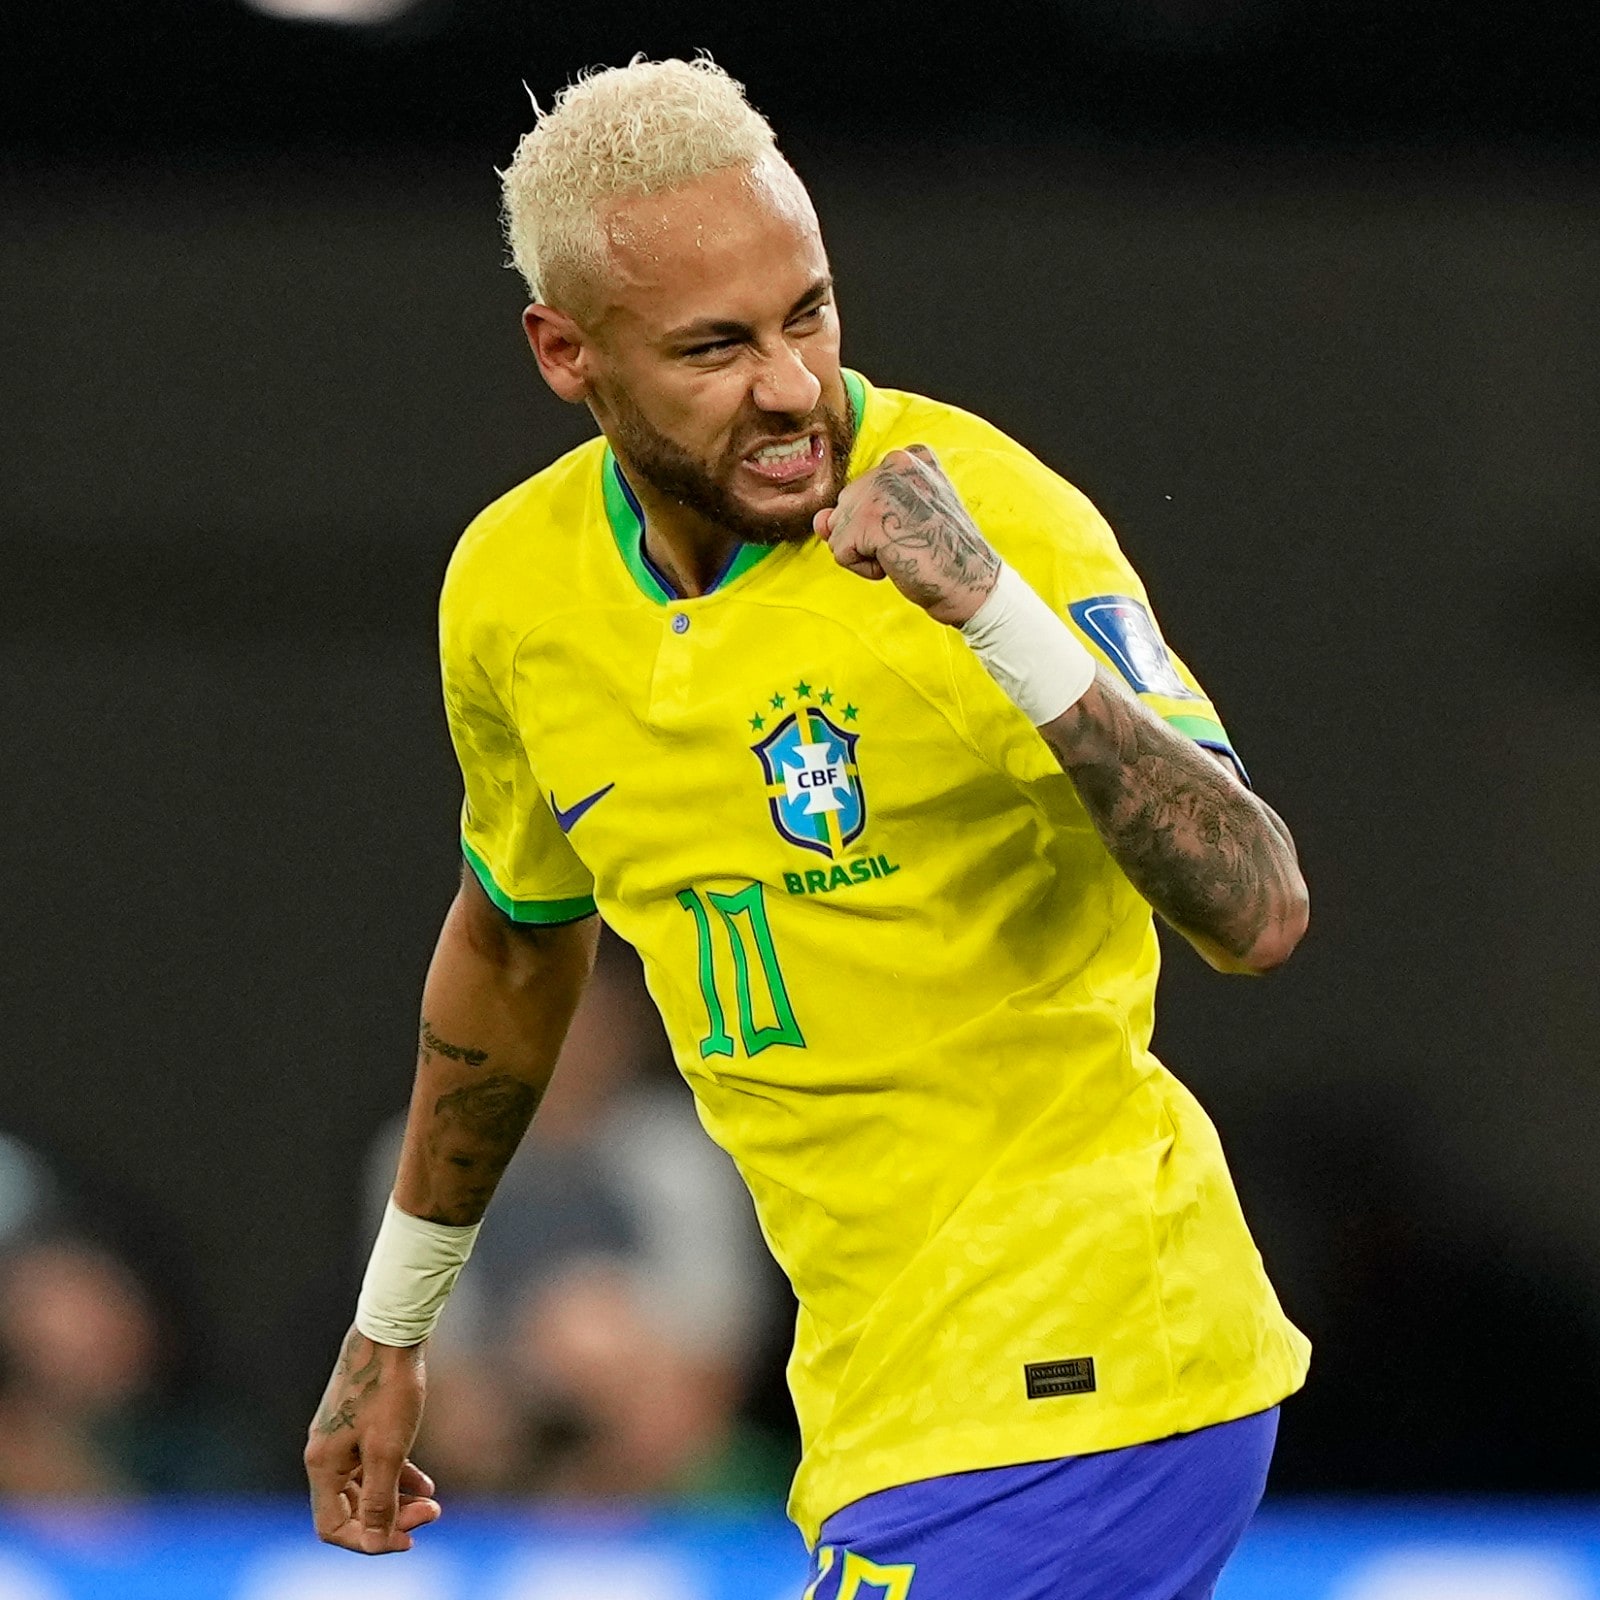 Watch: Neymar scores for Brazil in FIFA World Cup after return from bad ankle injury